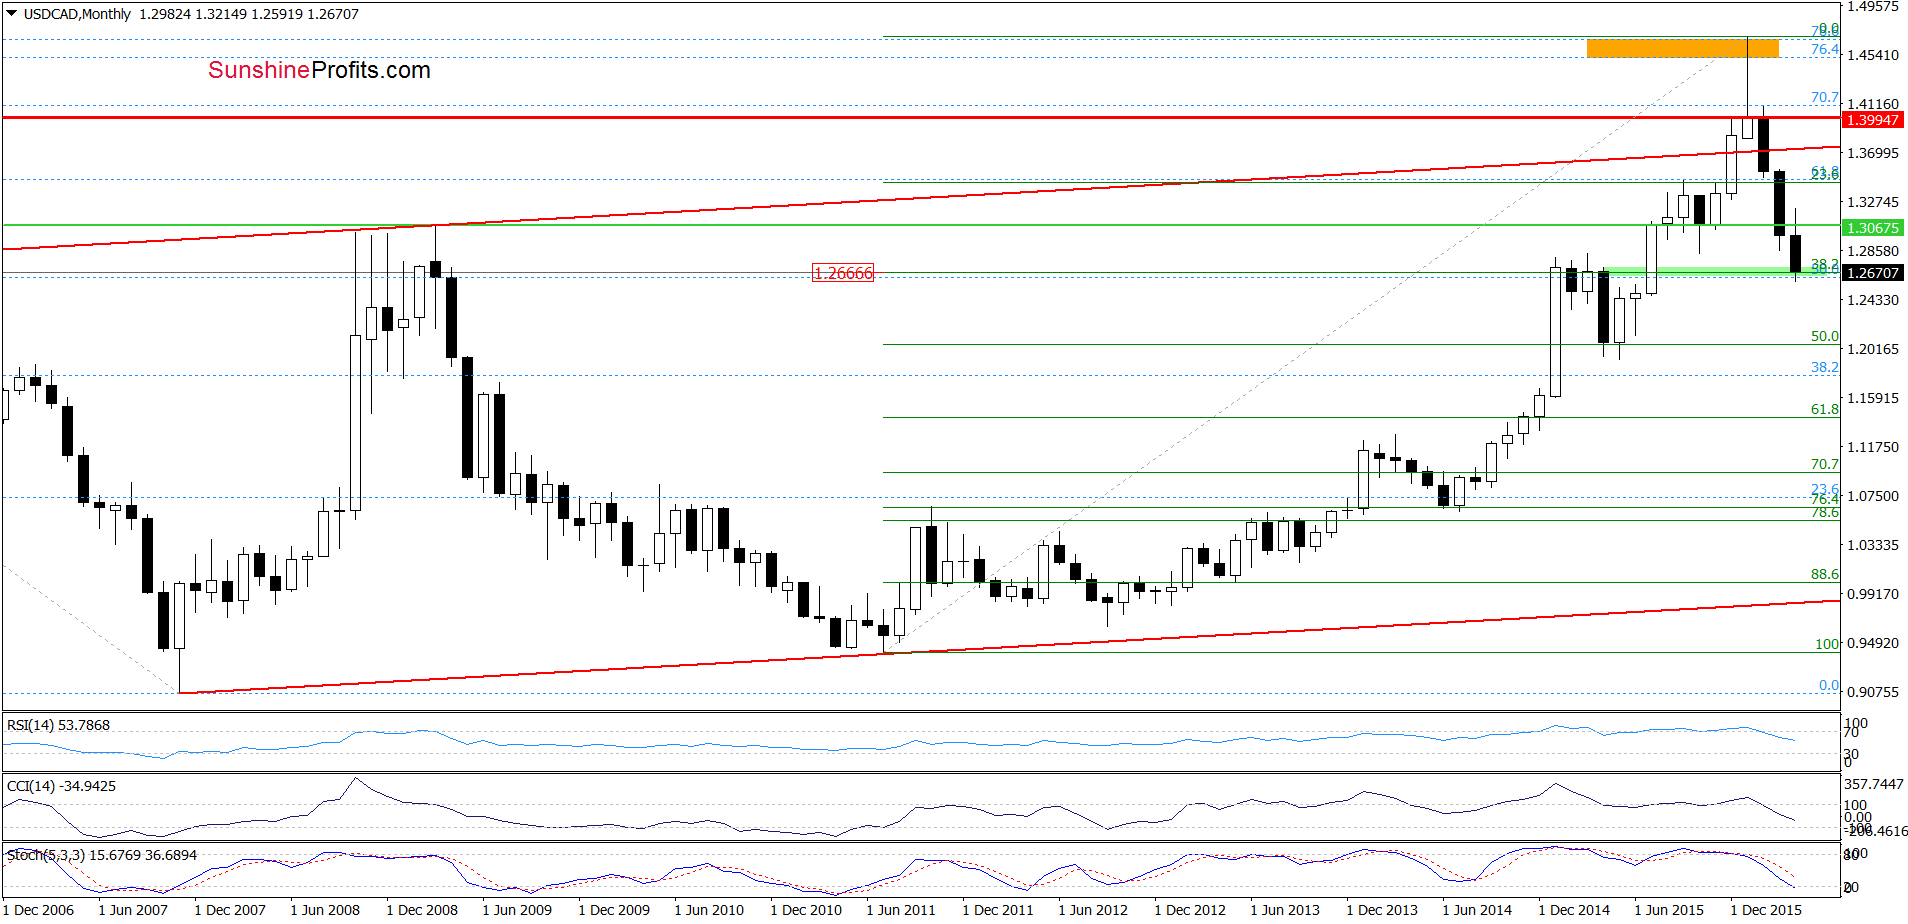 USD/CAD - the monthly chart